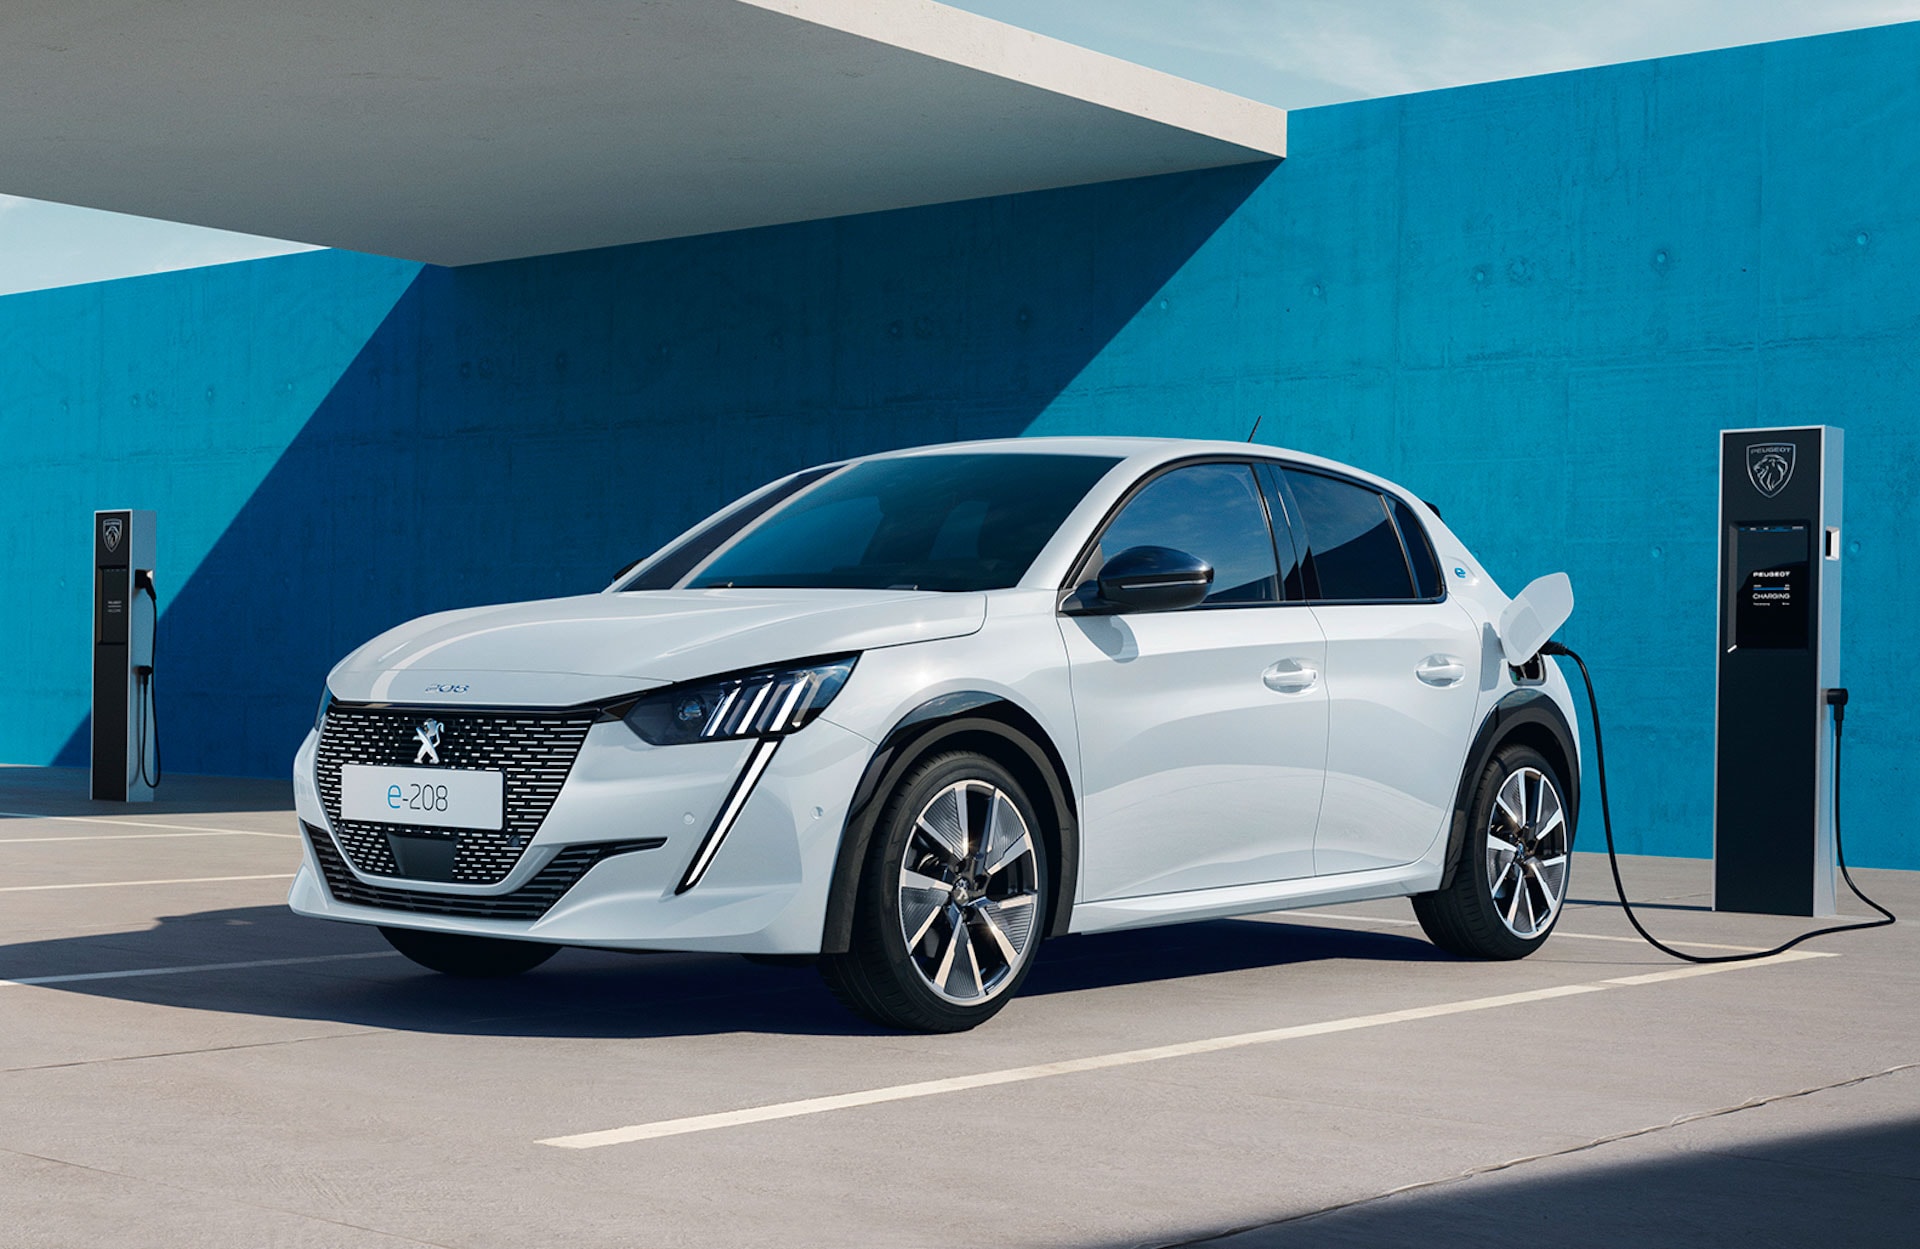 The Peugeot e-208 Gets a Little More Power and Range for 2023